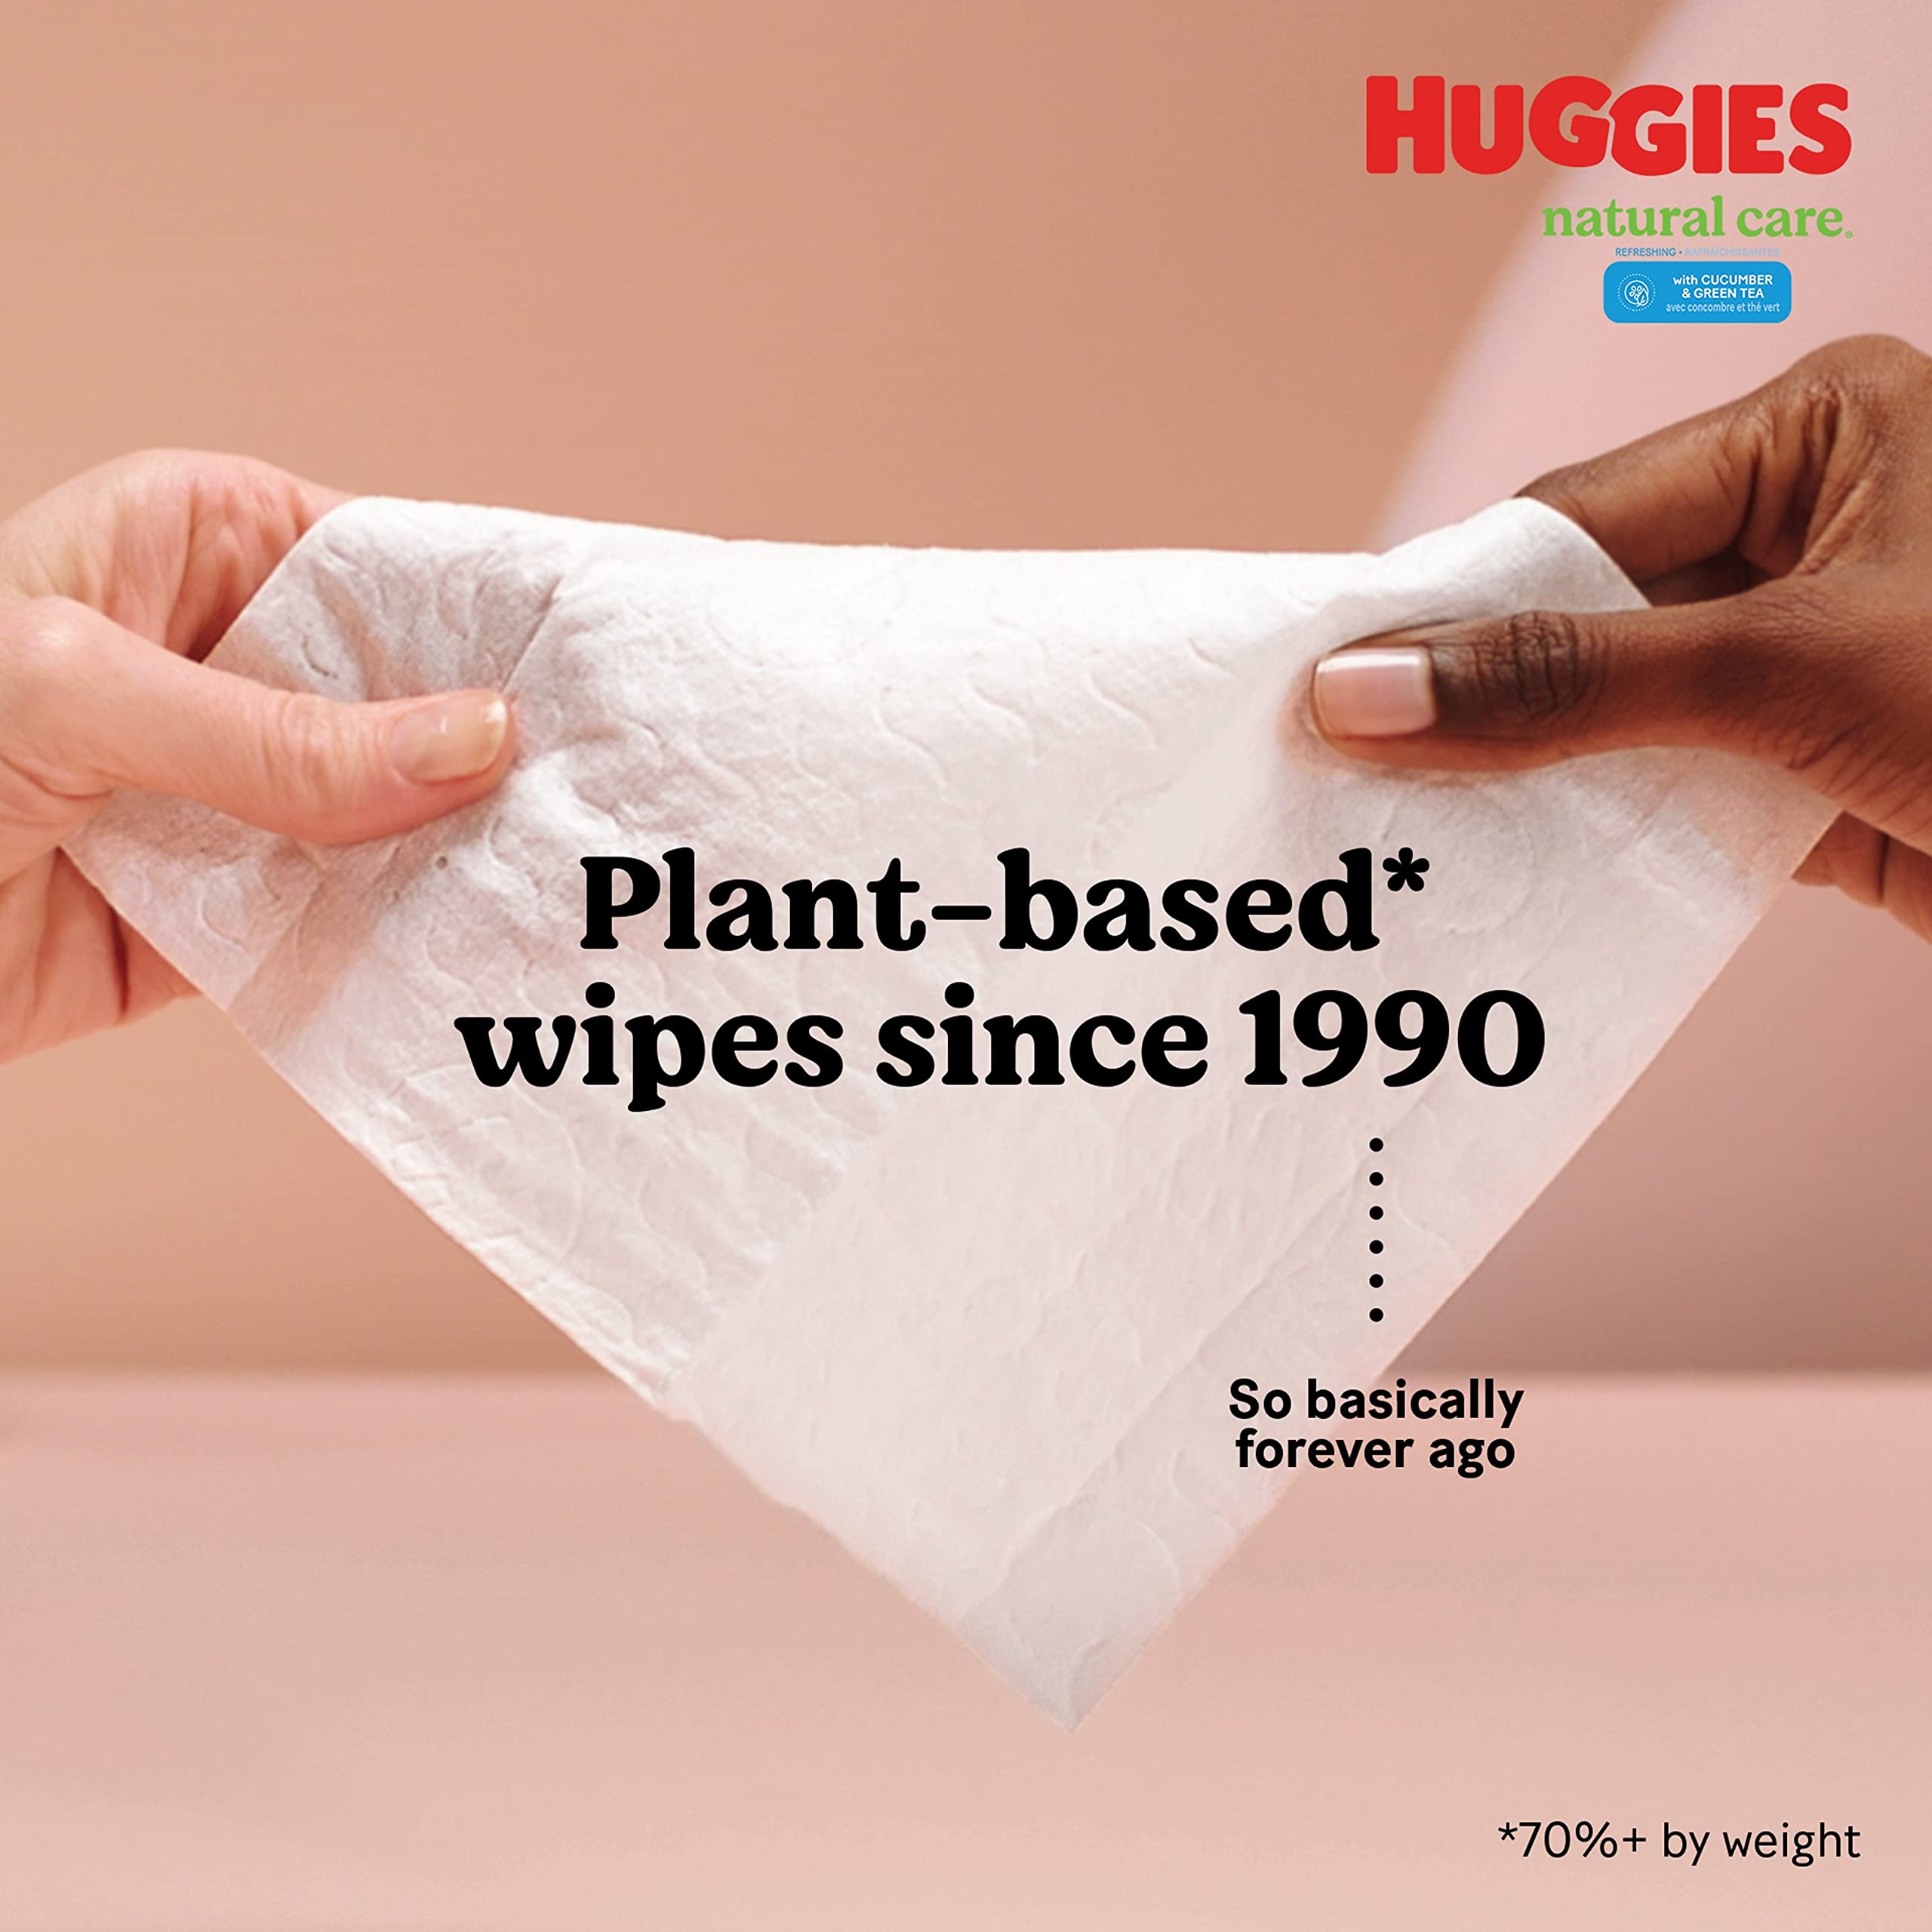 Baby Wipes, Huggies Natural Care Refreshing Baby Diaper Wipes, Hypoallergenic, Scented, 1 Flip-Top Pack (56 Wipes Total)